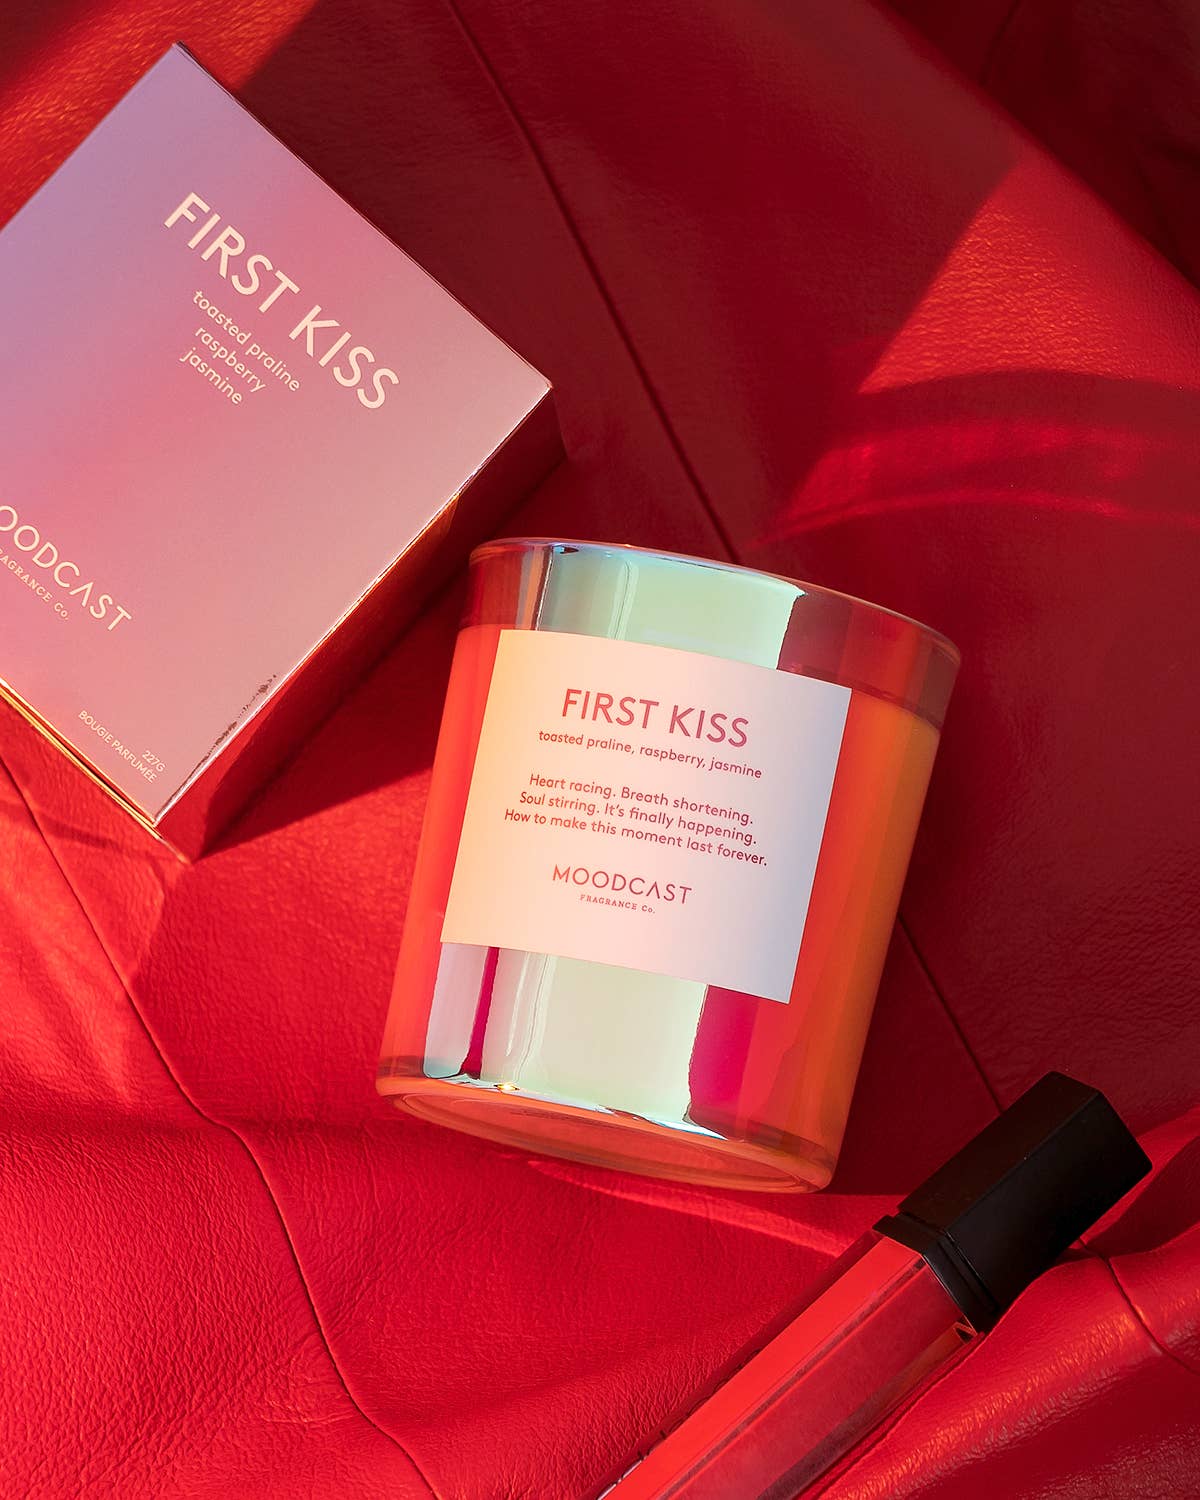 First Kiss - Iridescent 8oz Coconut Wax Candle